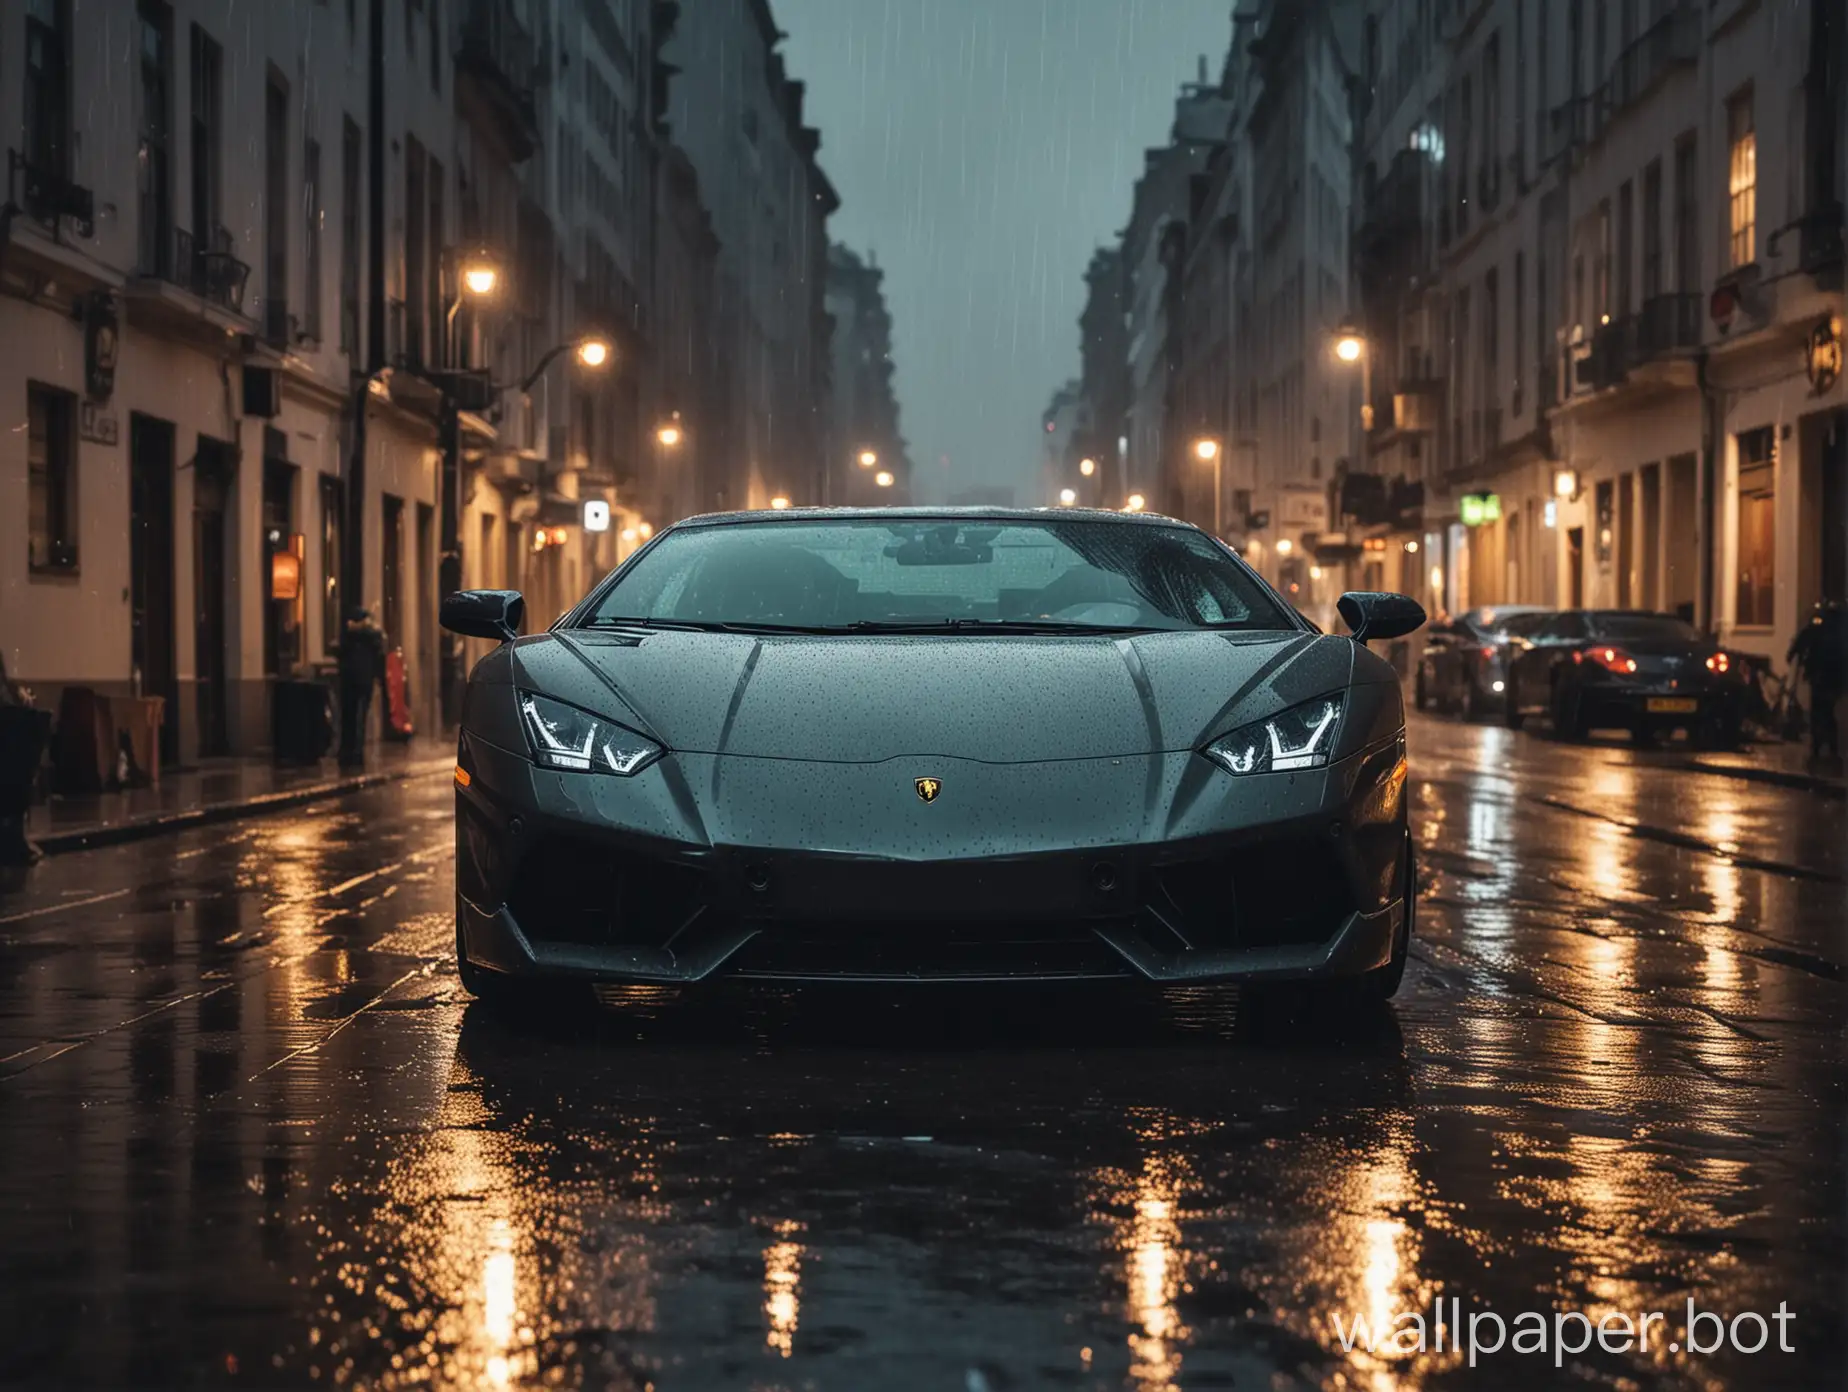 Lamborghini from the front in the city in a rainy night